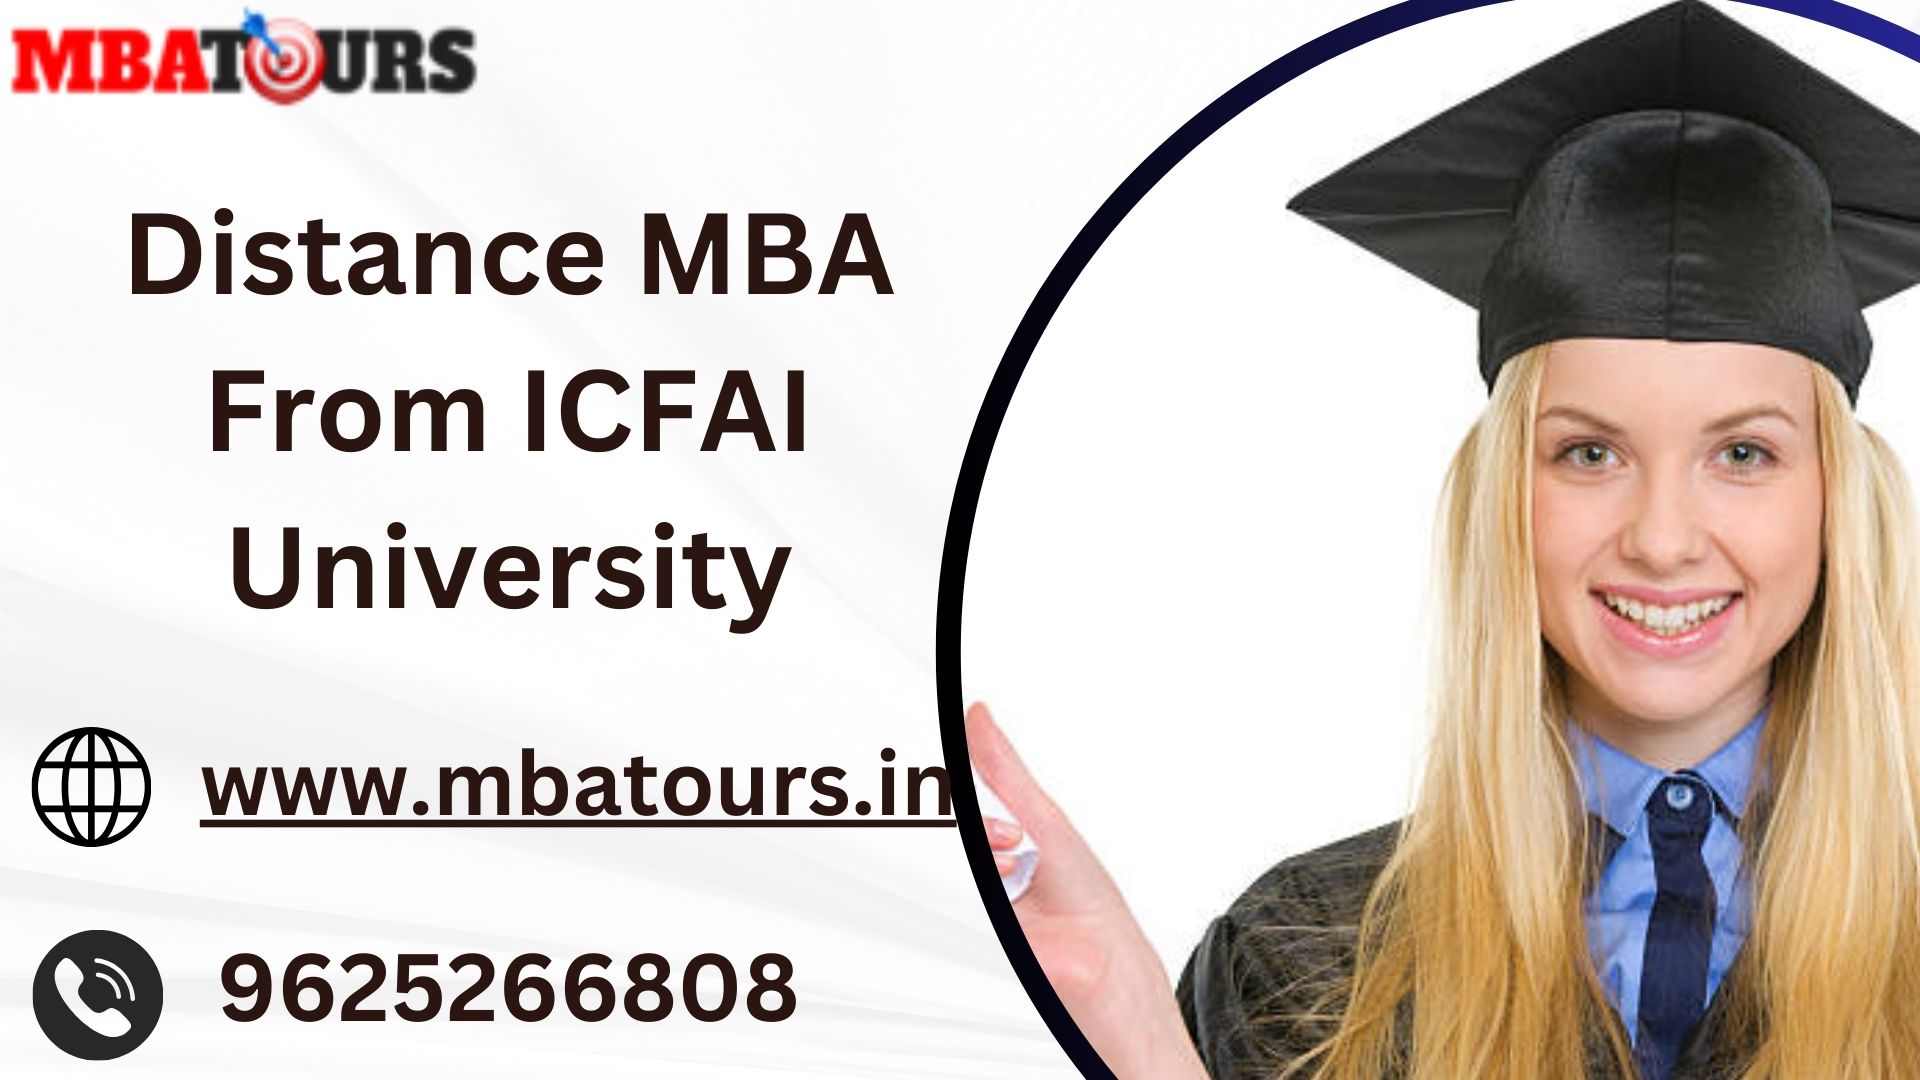 Distance MBA From ICFAI University